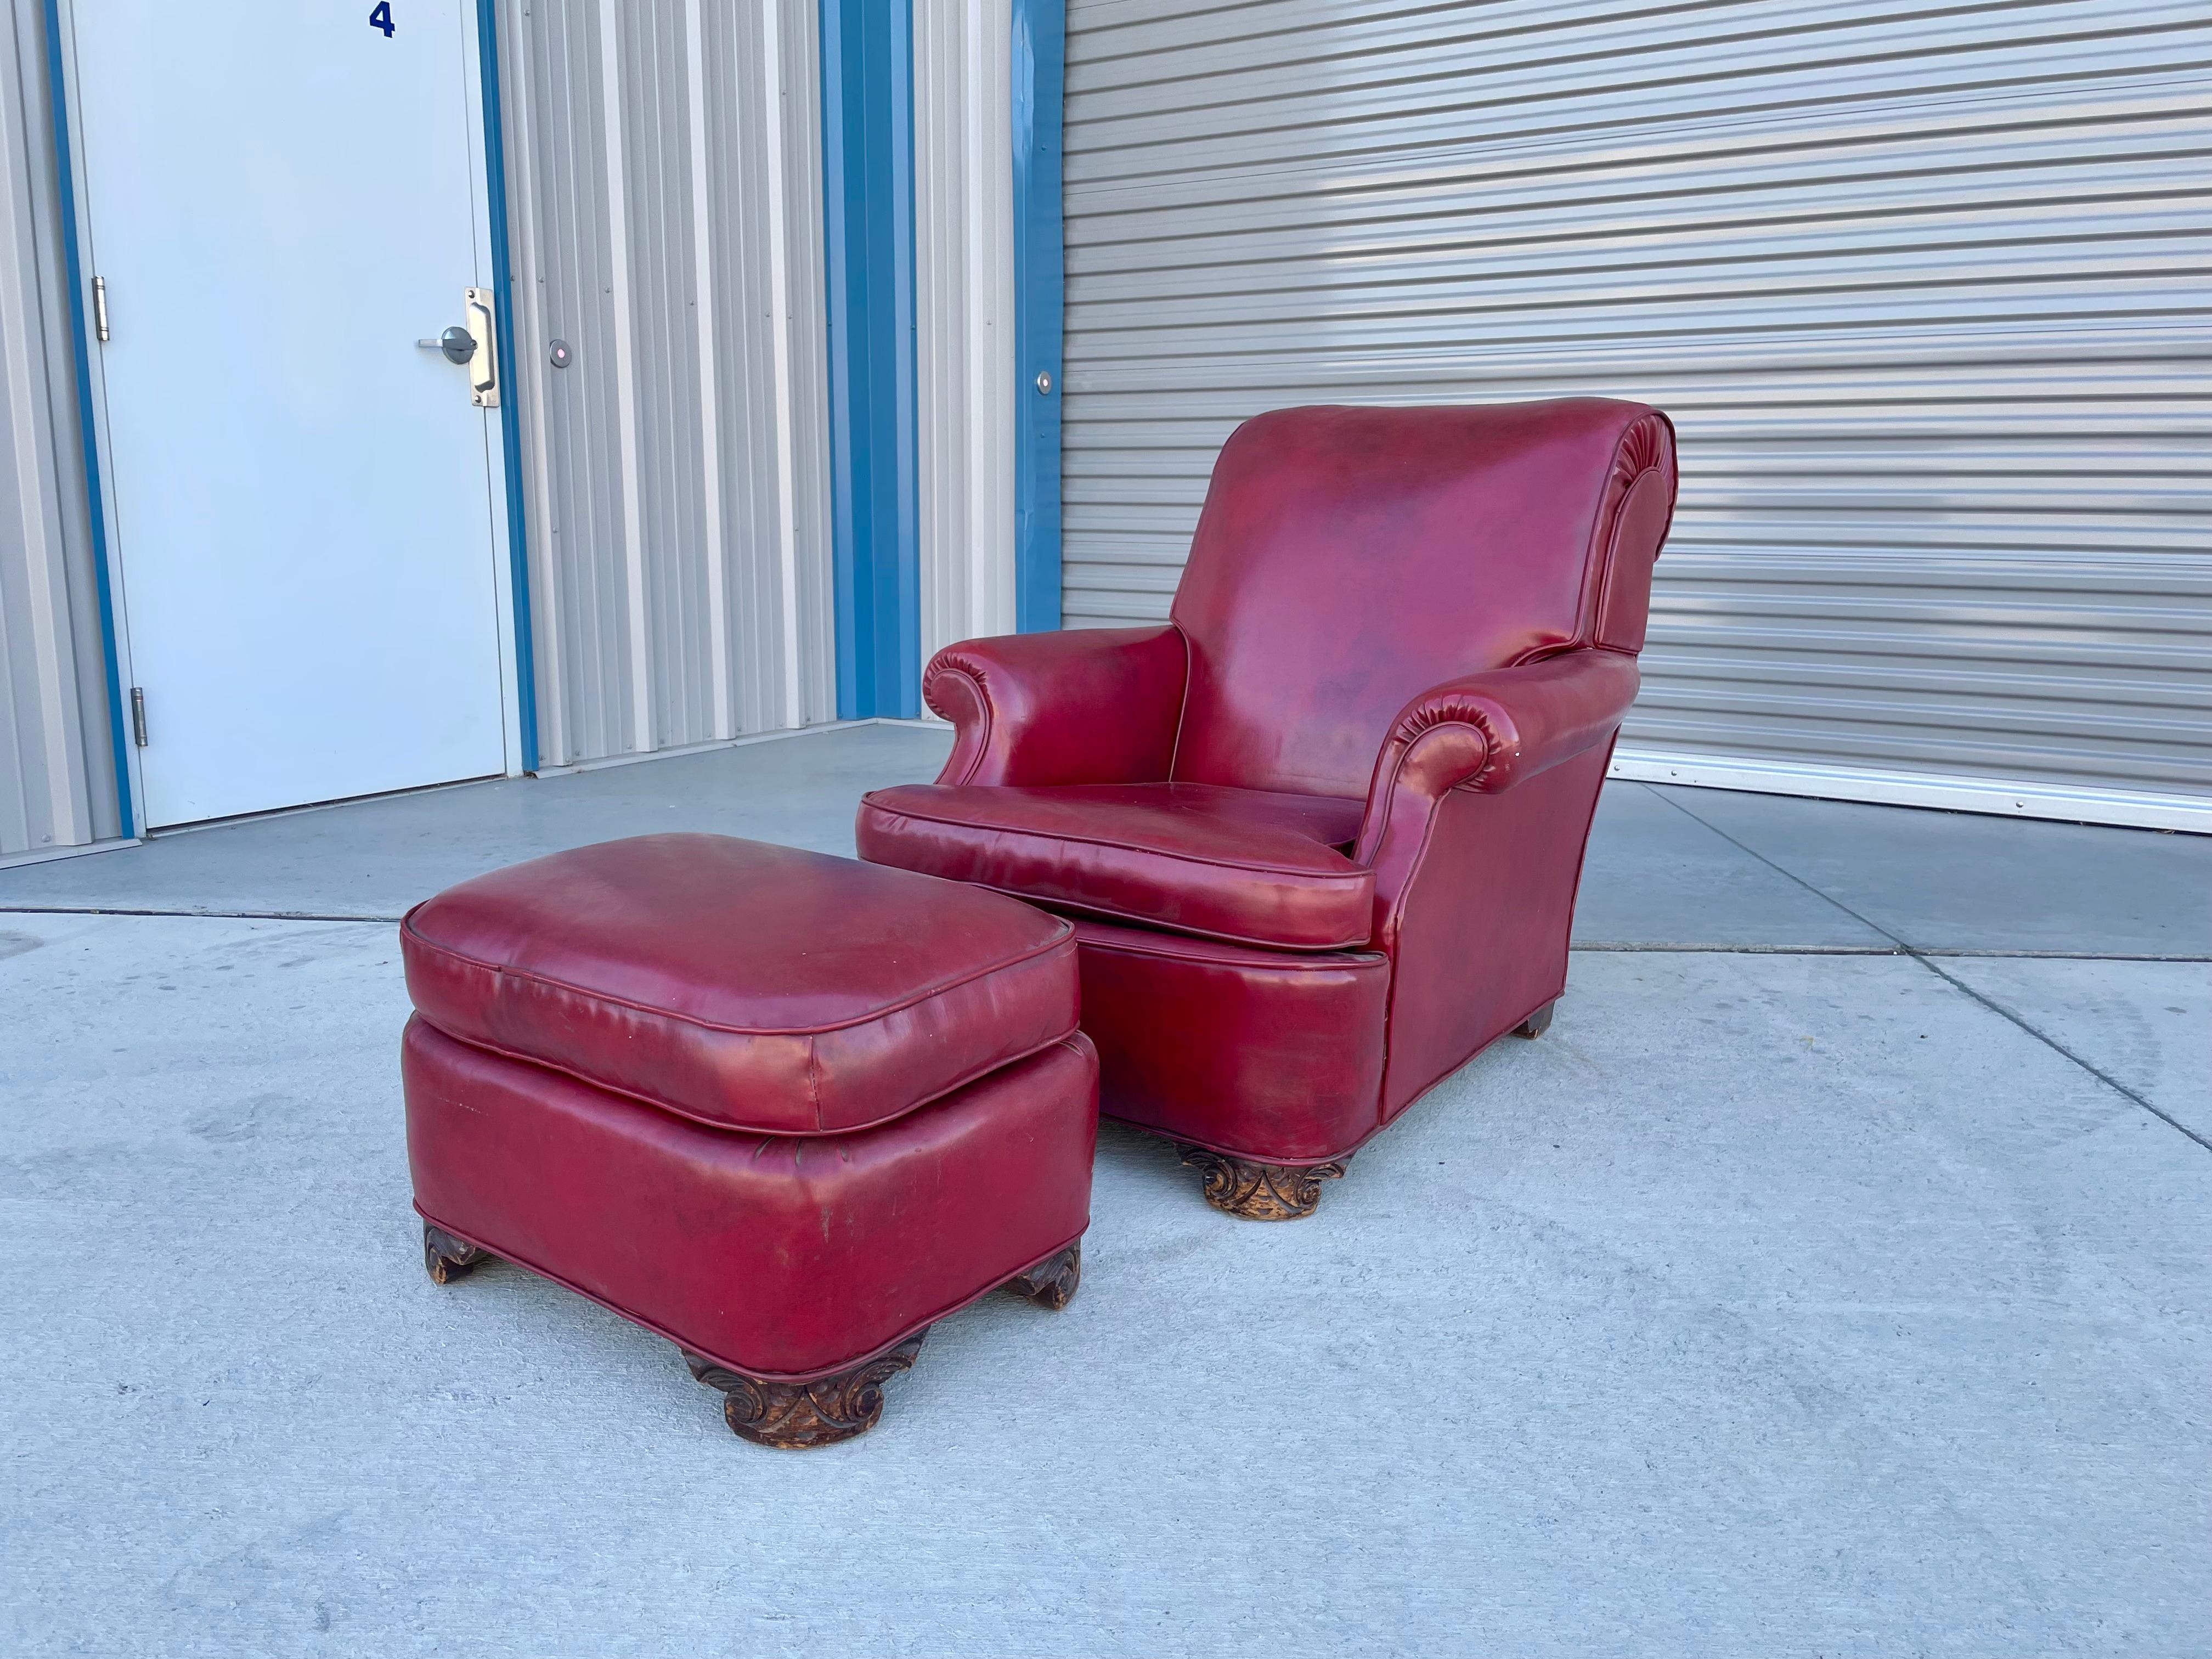 Vintage leather chair & ottoman designed and manufactured in the United States circa 1950s. This amazing set features a stunning red leather upholstery that sits on four sturdy wooden legs. The craftsmanship and attention to detail on this piece is